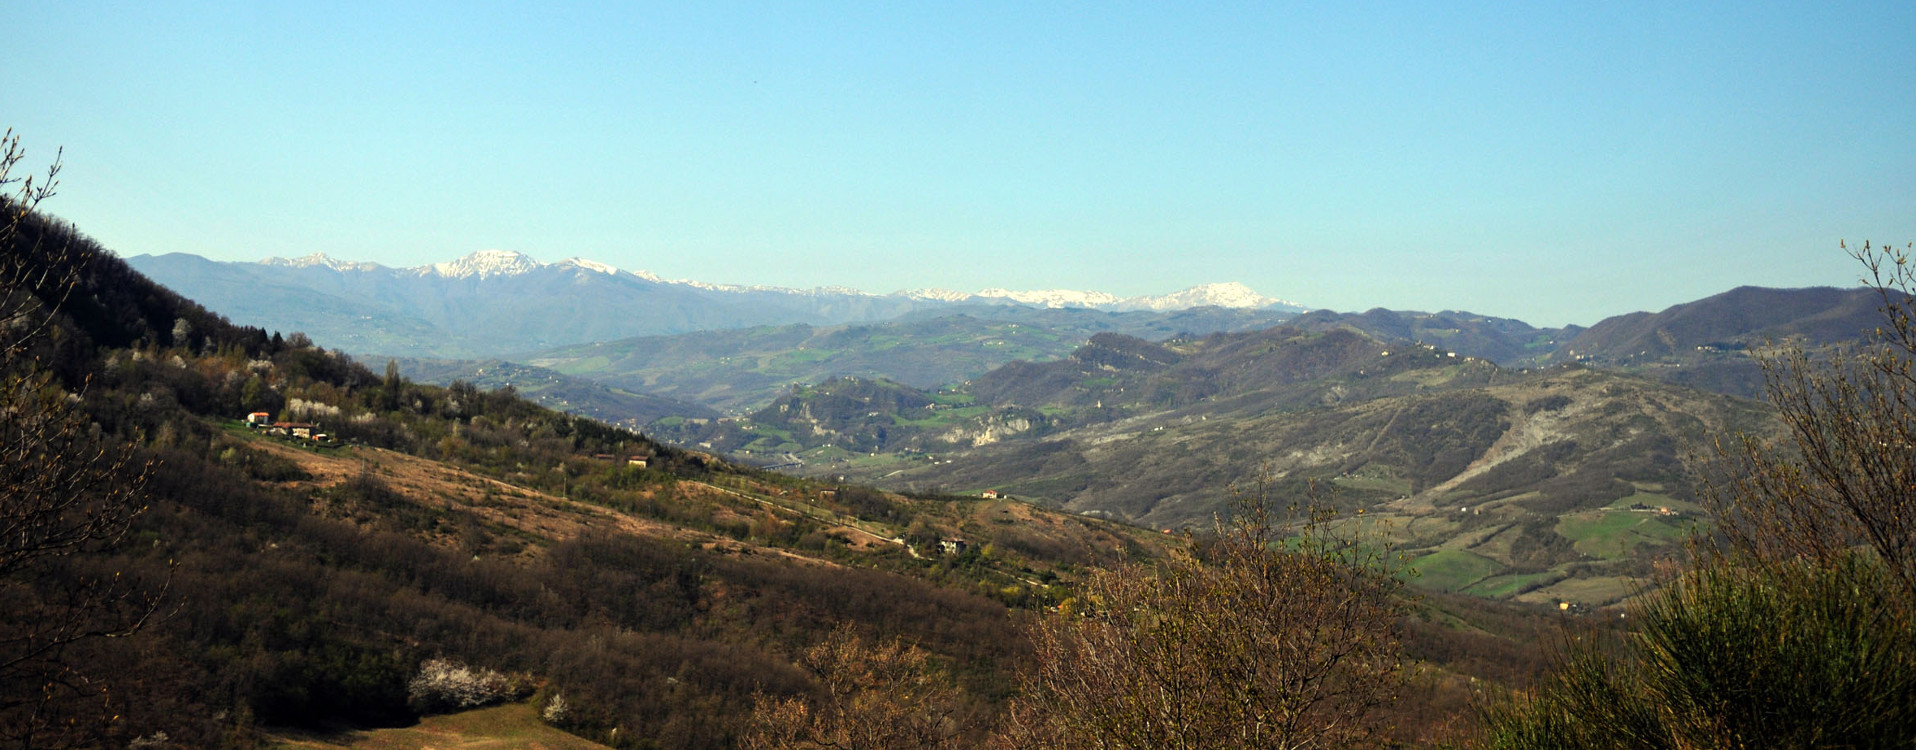 Panorama dell'Appennino bolognese